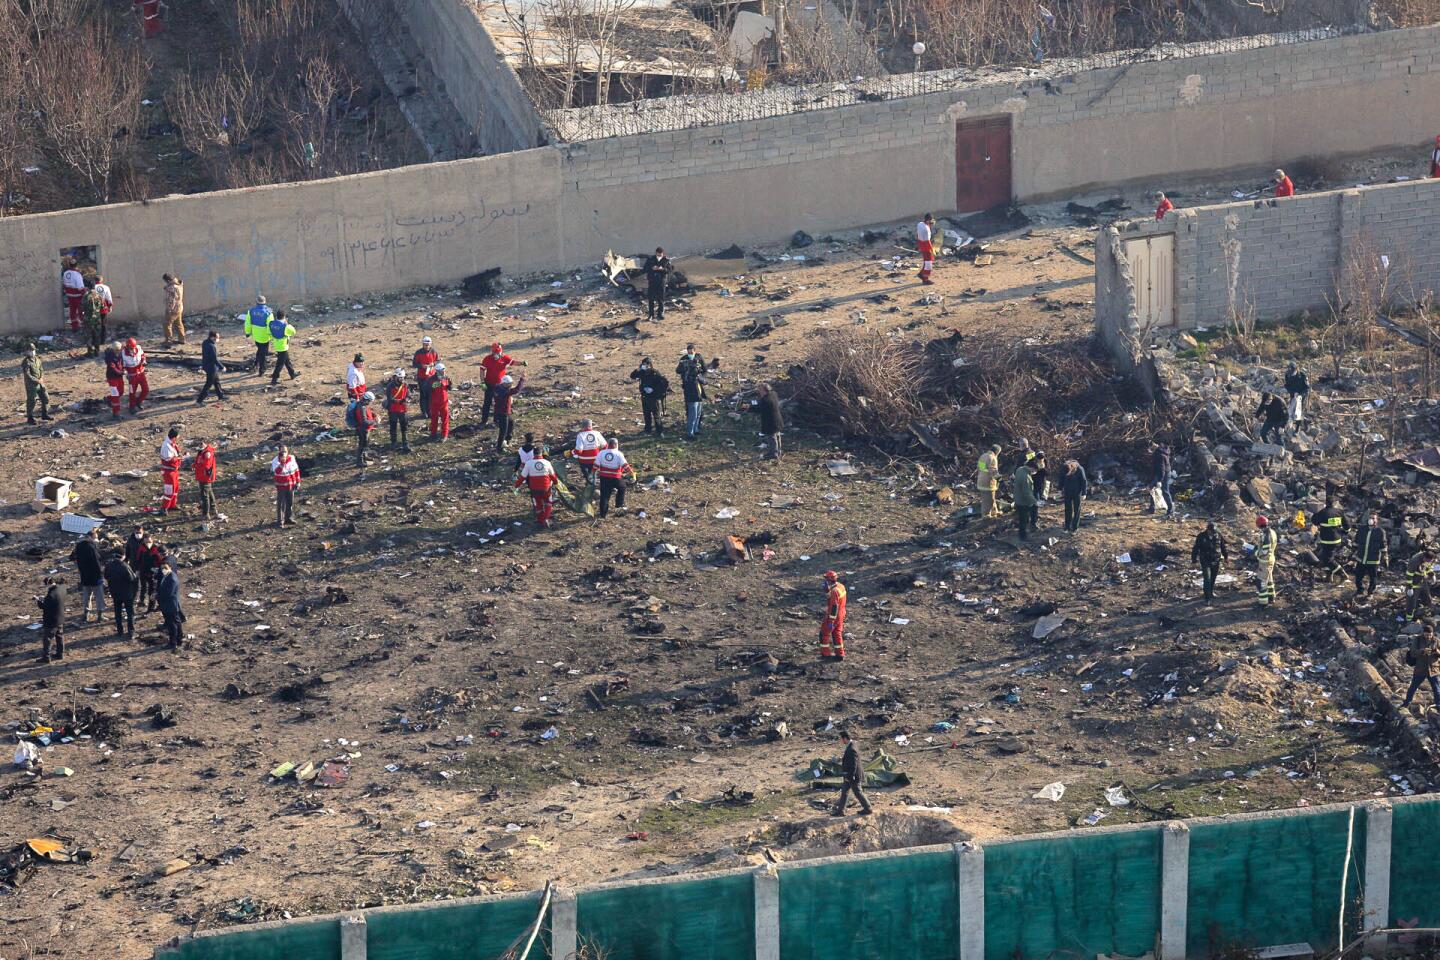 An aerial view of the scene of the plane crash.